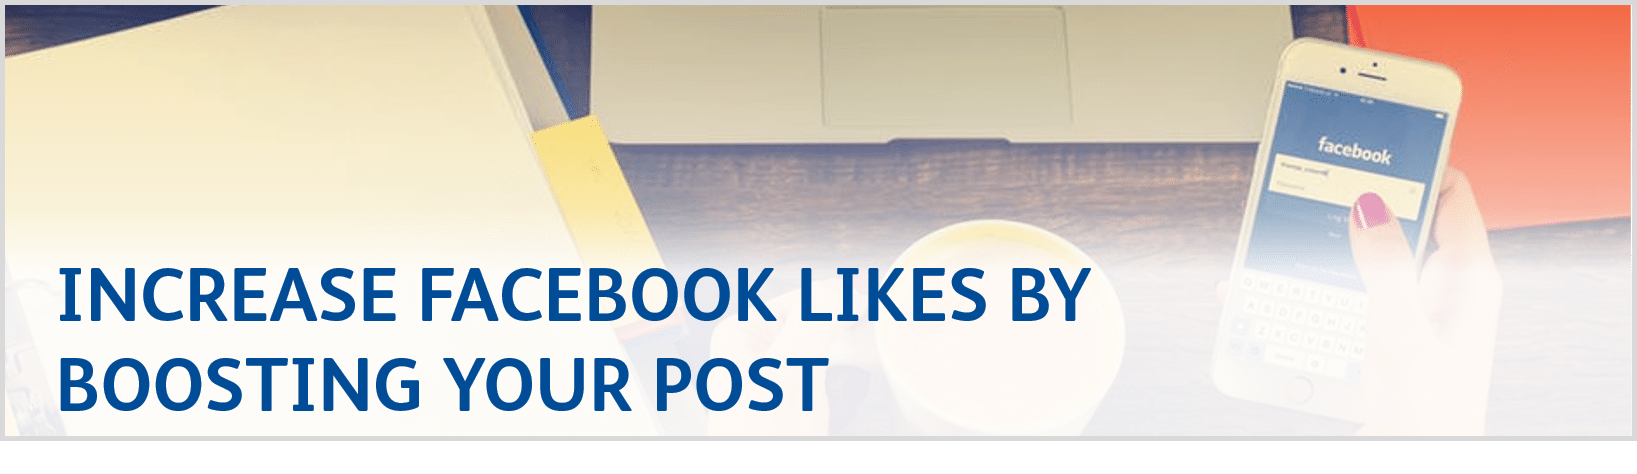 Facebook Refocuses Newsfeed: What It Means For Your Brand